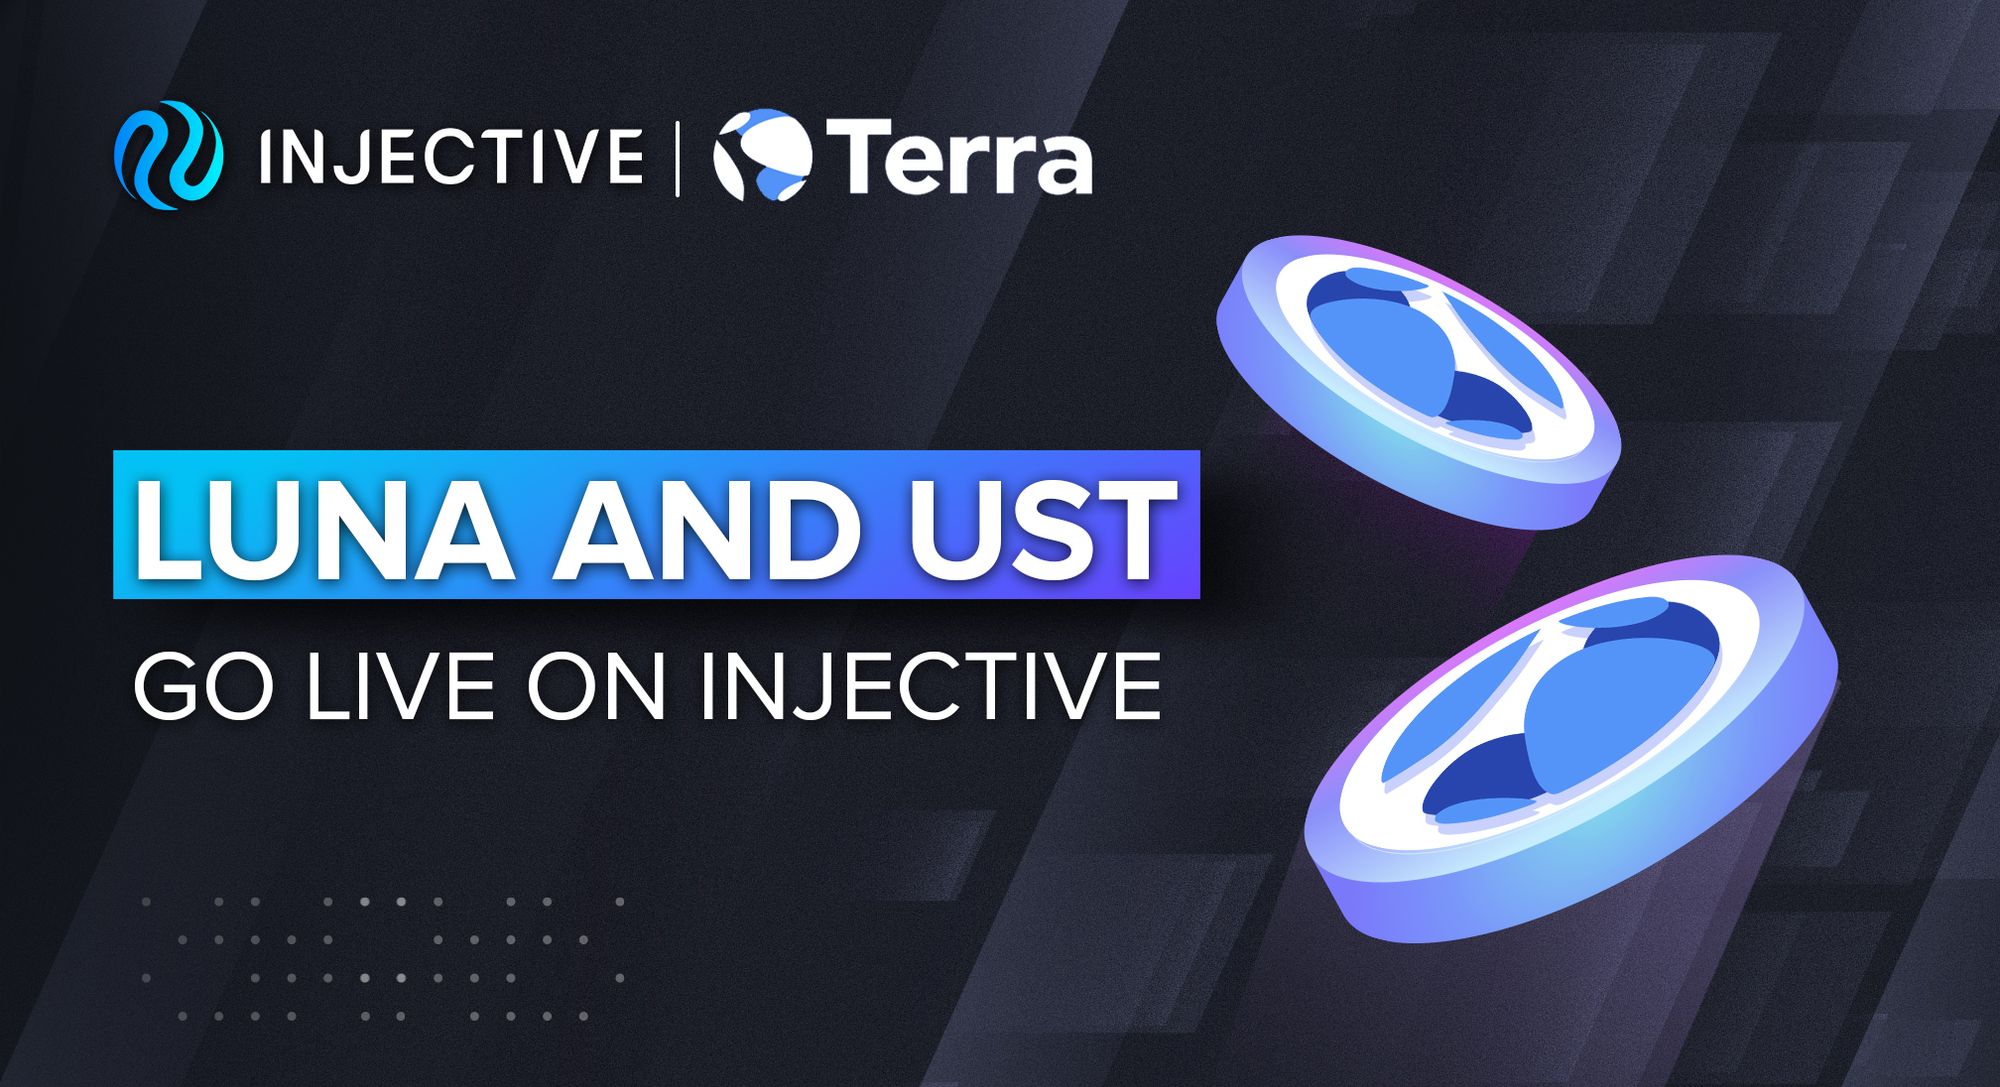 Terra Ecosystem Markets Launch on Injective